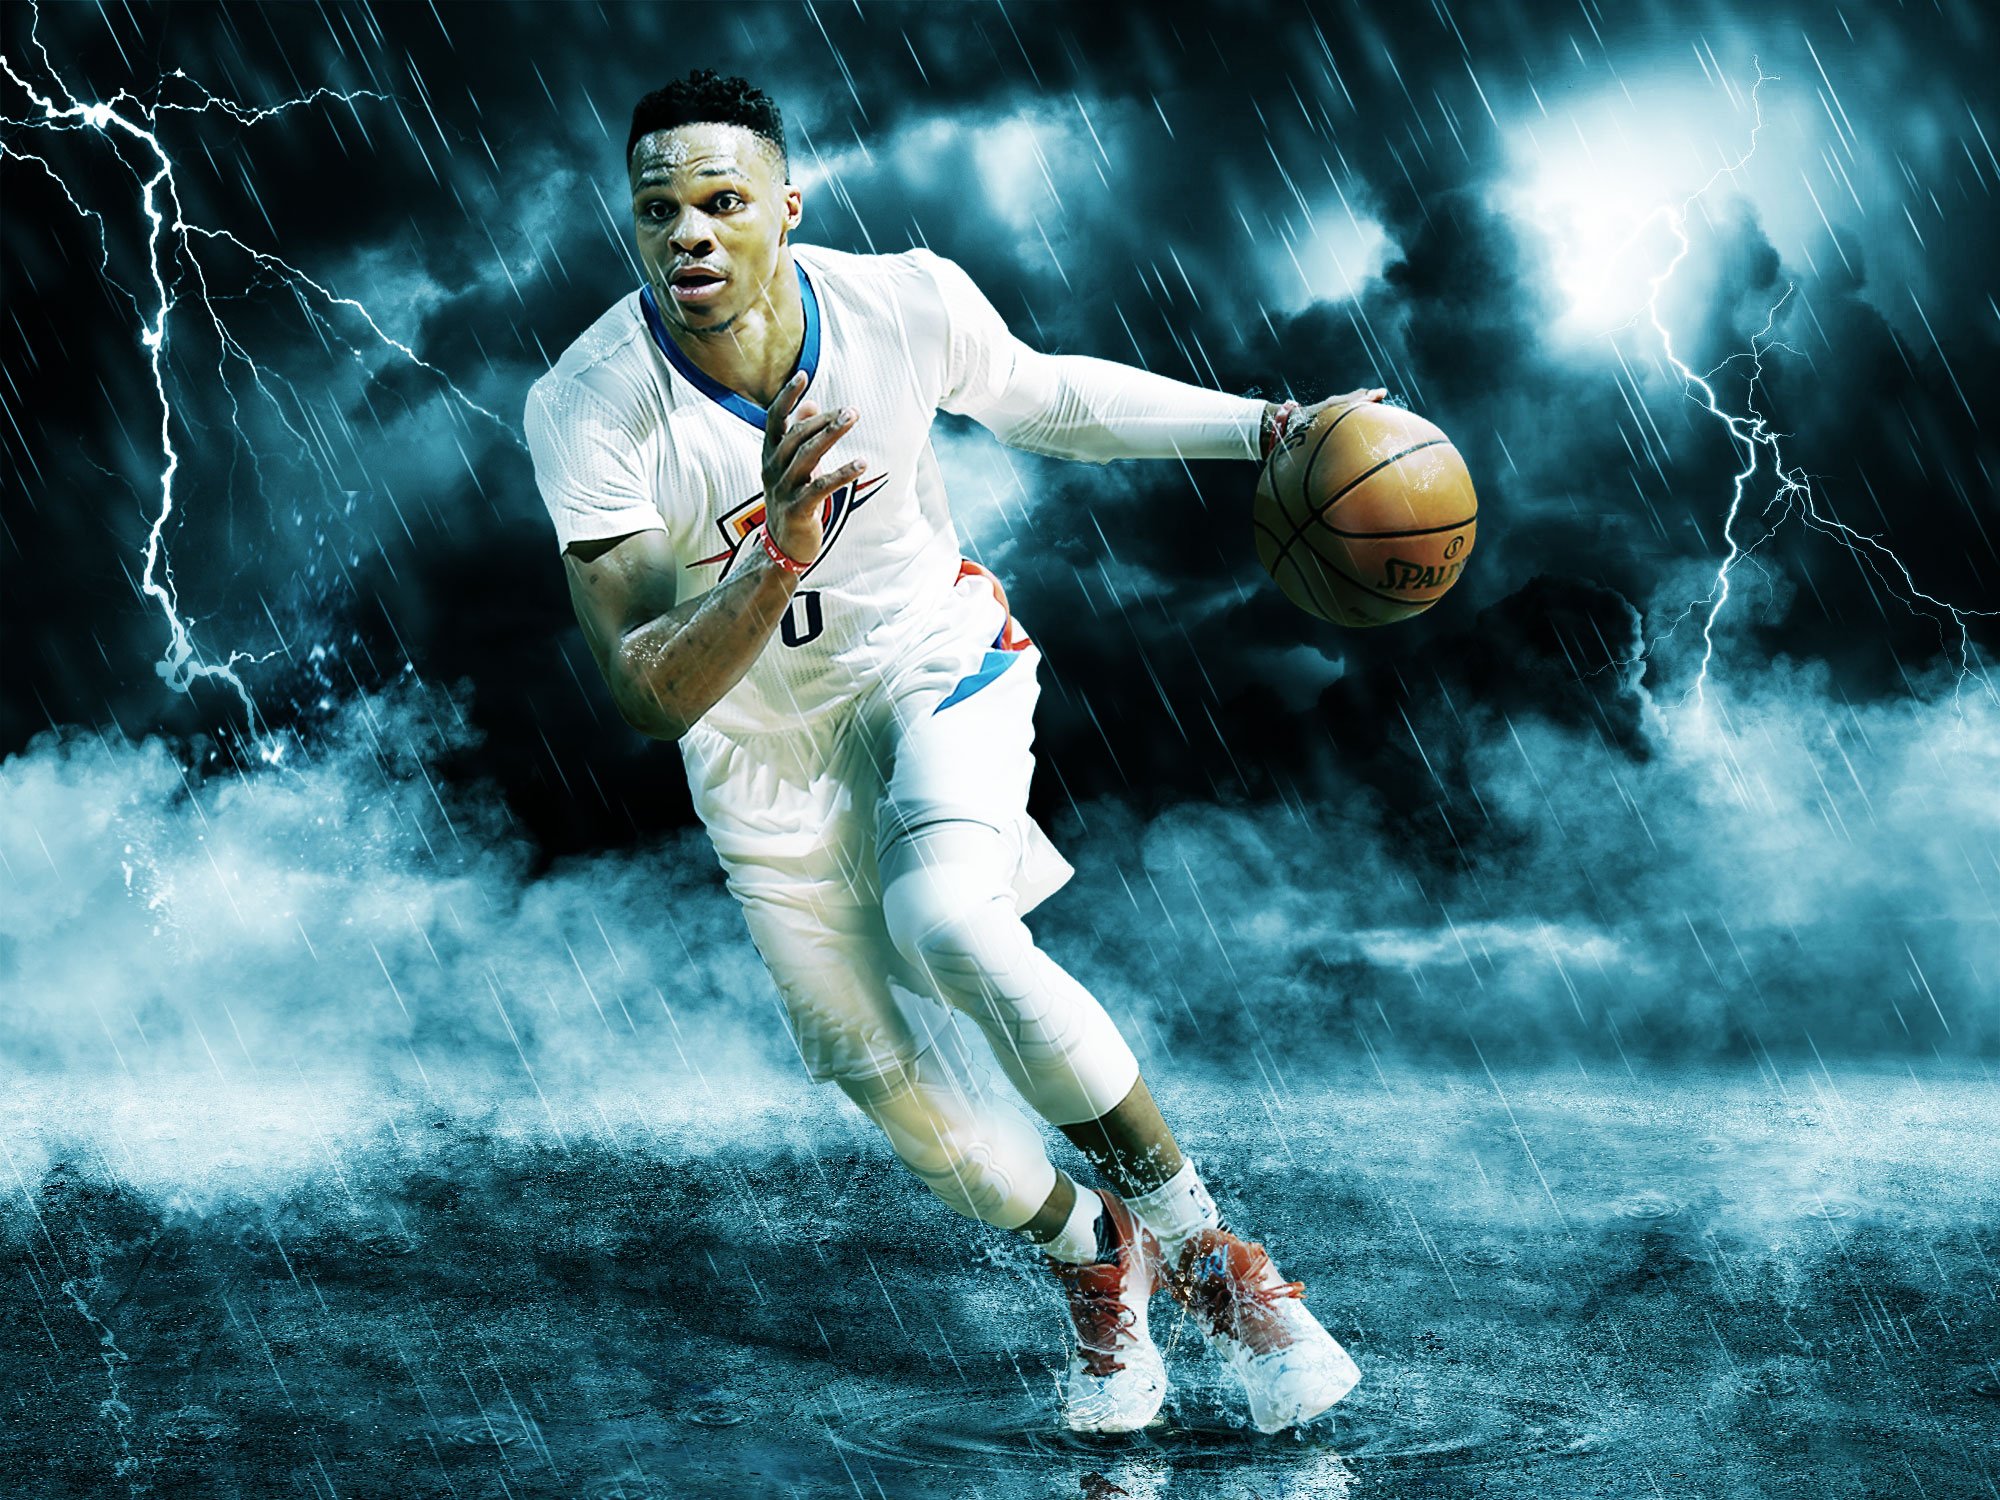 Amazoncom MasonArts Russell Westbrook 21inch x 14inch Silk Poster Dunk  and Shot Wallpaper Wall Decor Silk Prints for Home and Store  Tools  Home  Improvement